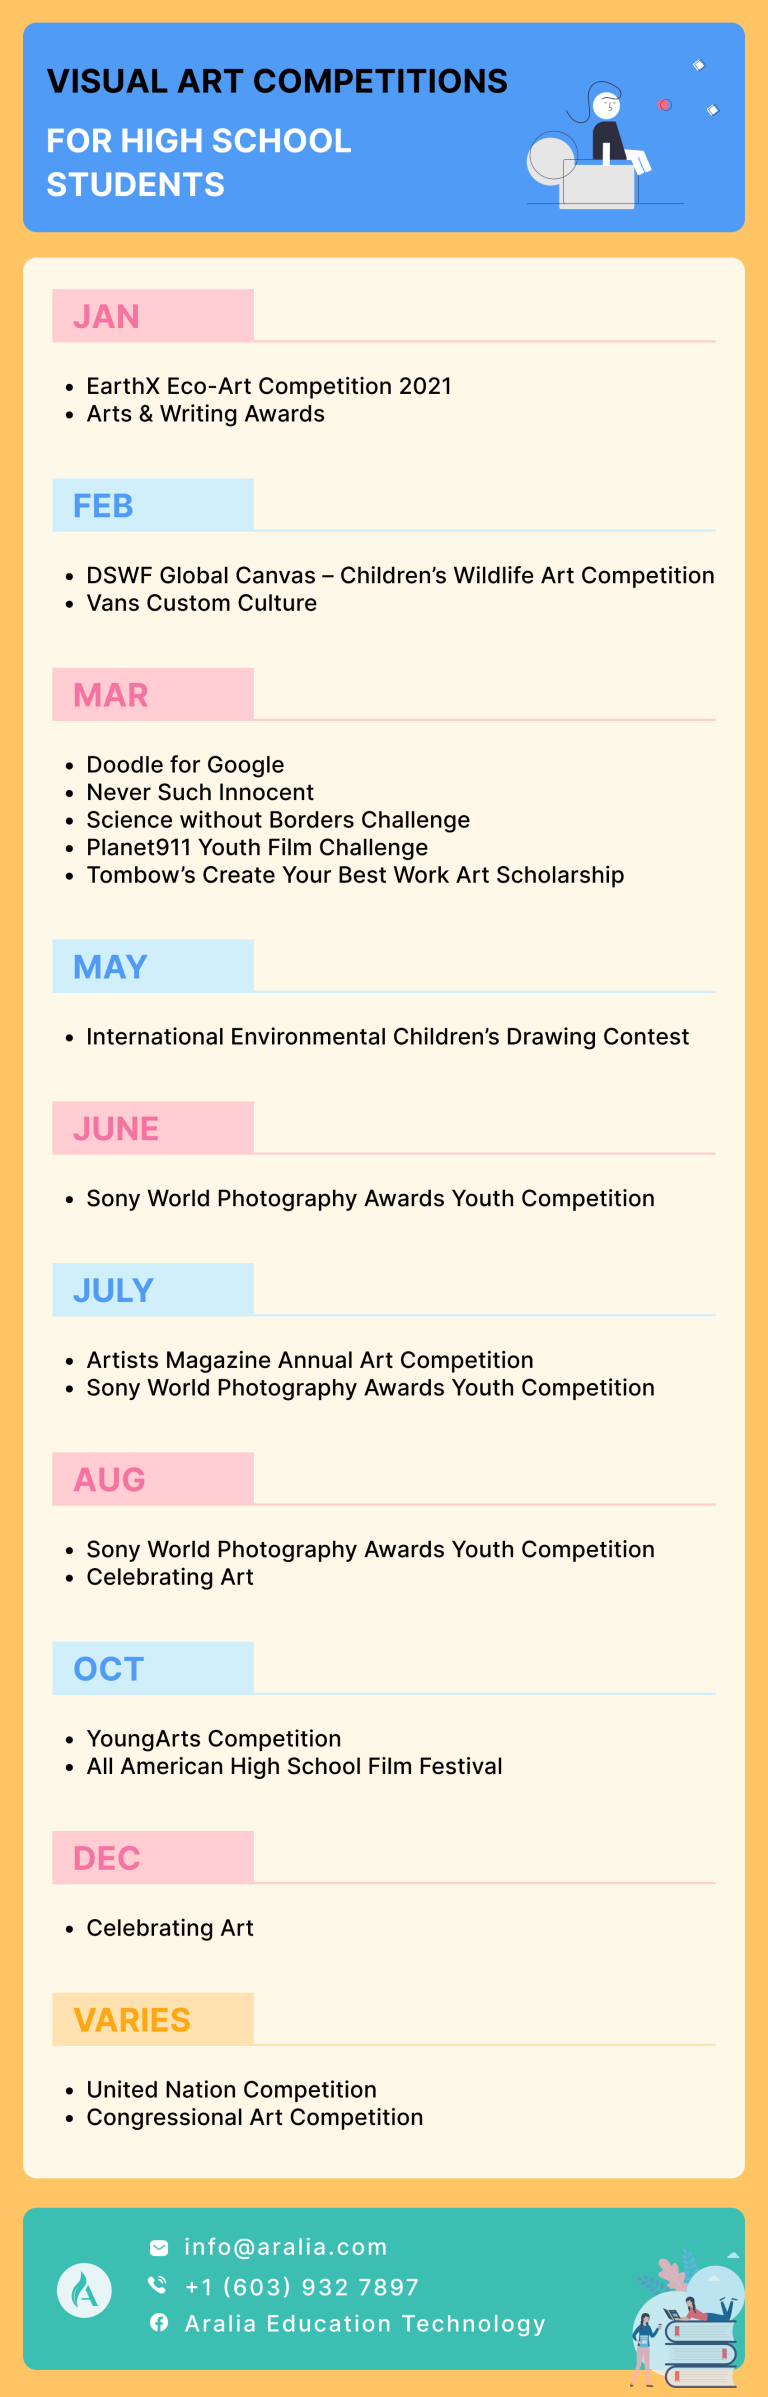 visual art competitions